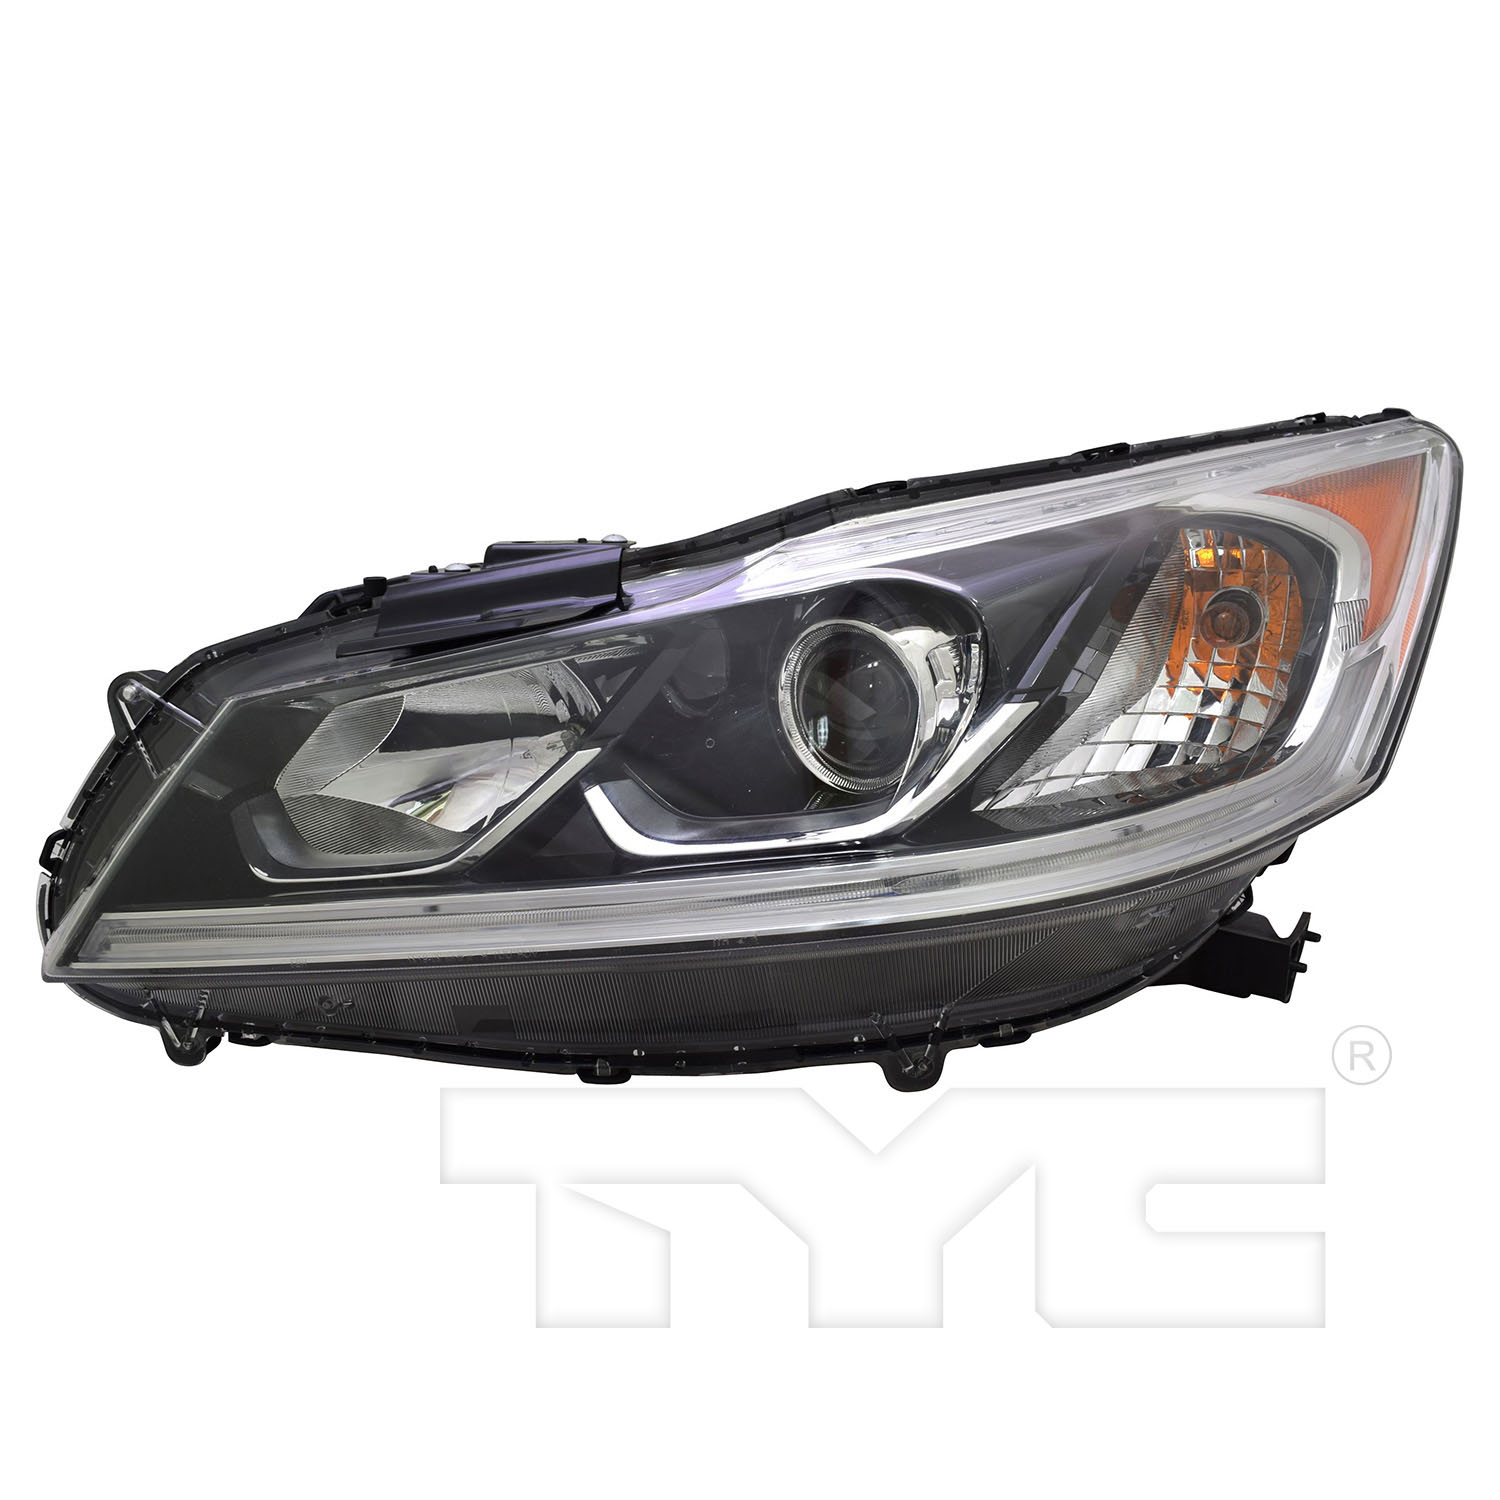 Aftermarket HEADLIGHTS for HONDA - ACCORD, ACCORD,16-17,LT Headlamp assy composite